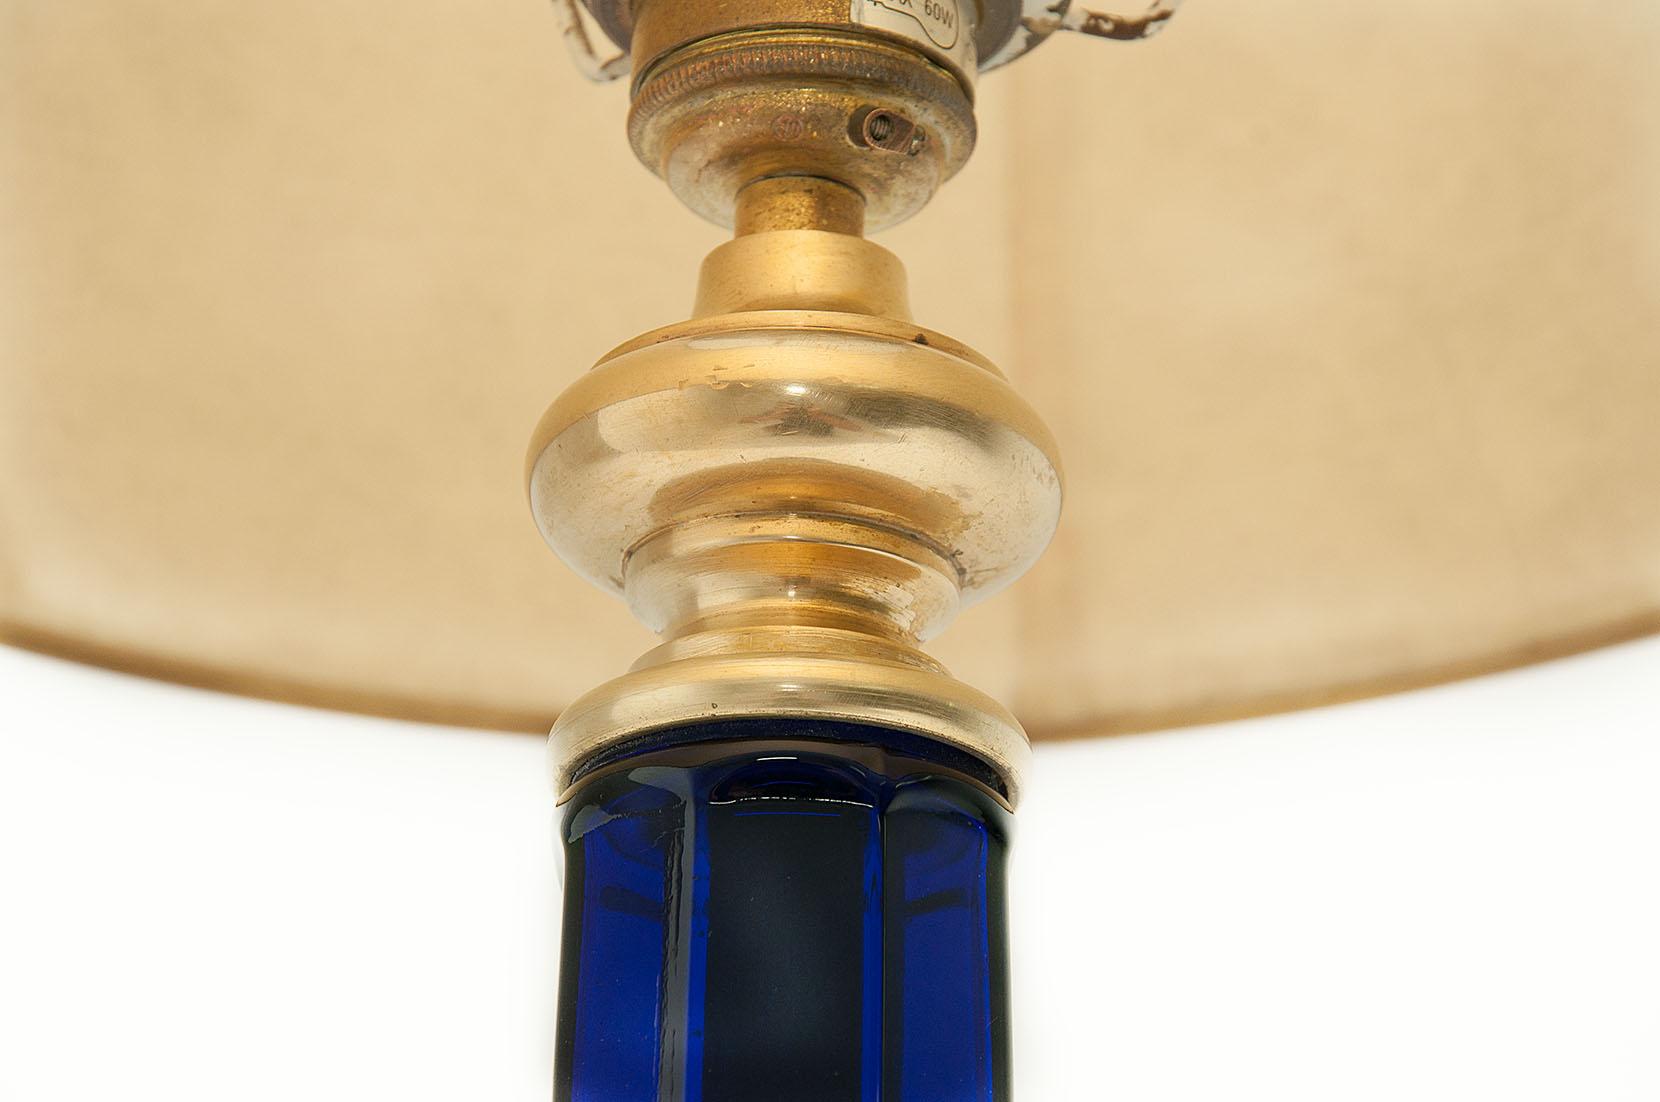 American Classical Table Lamp in Blue Glass and Brass, Large, 1970, in the Murano Style